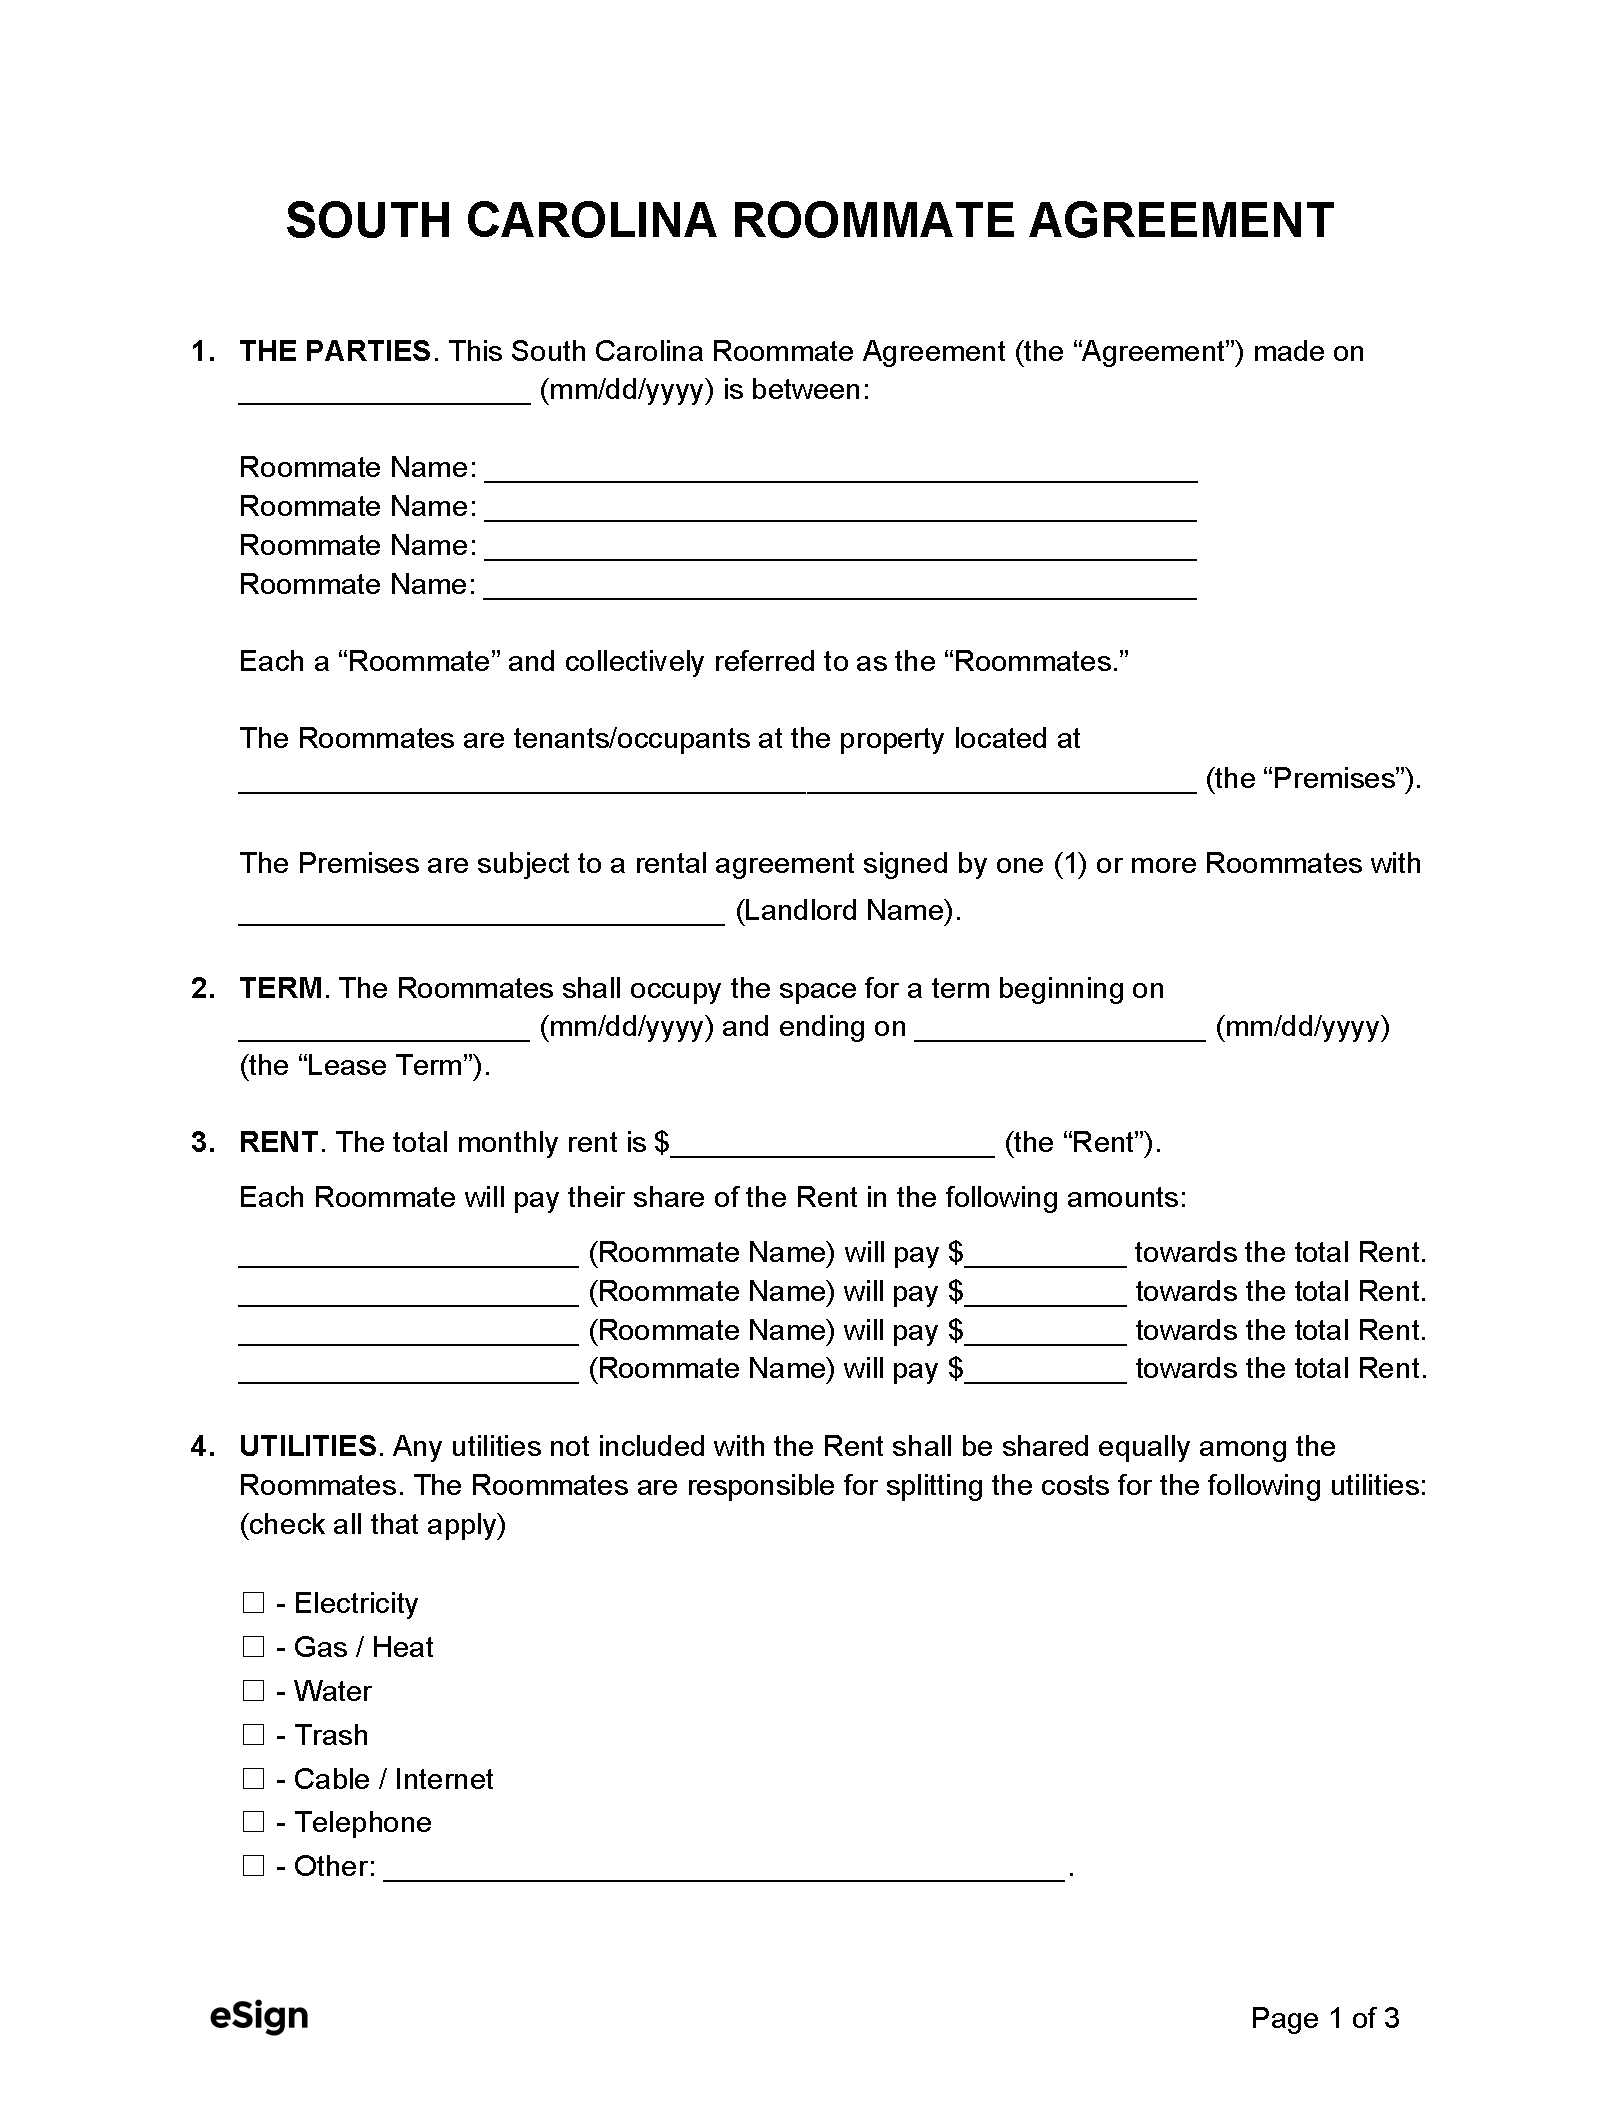 Free South Carolina Roommate Agreement Template - PDF  Word Within free roommate lease agreement template